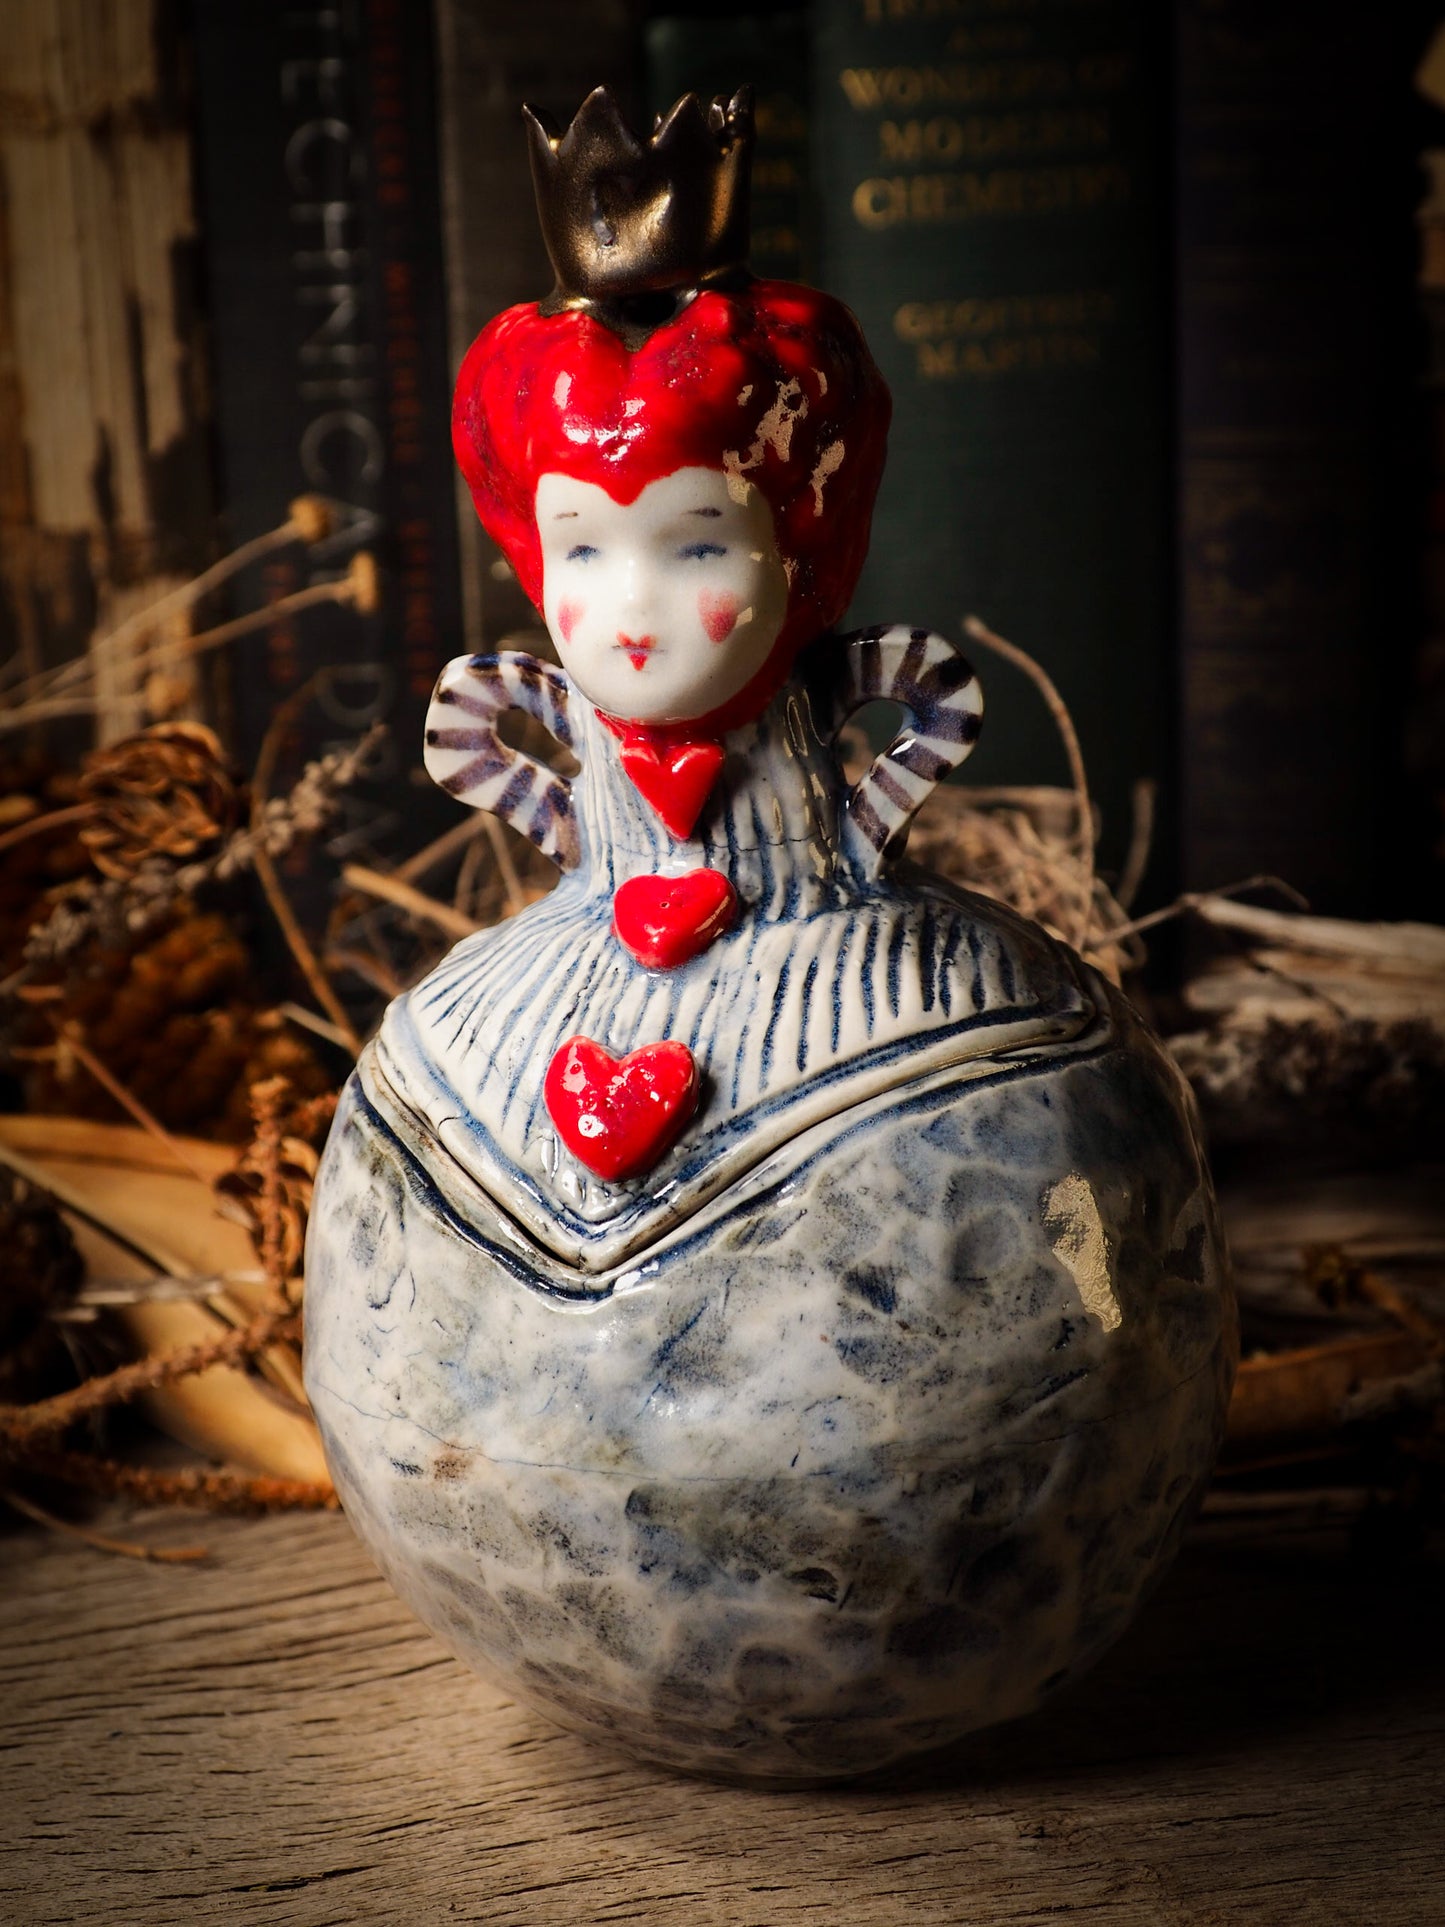 Red Queen hearts vintage ceramic figure inspired by Alice in Wonderland made by Idania Salcido, the mixed media artist and ceramist behind Danita Art. Earth clay is hand sculpted and glazed and kiln fired to create a ceramic home decor heirloom figurine. Each unique art piece is a one of a kind fine pottery artwork.